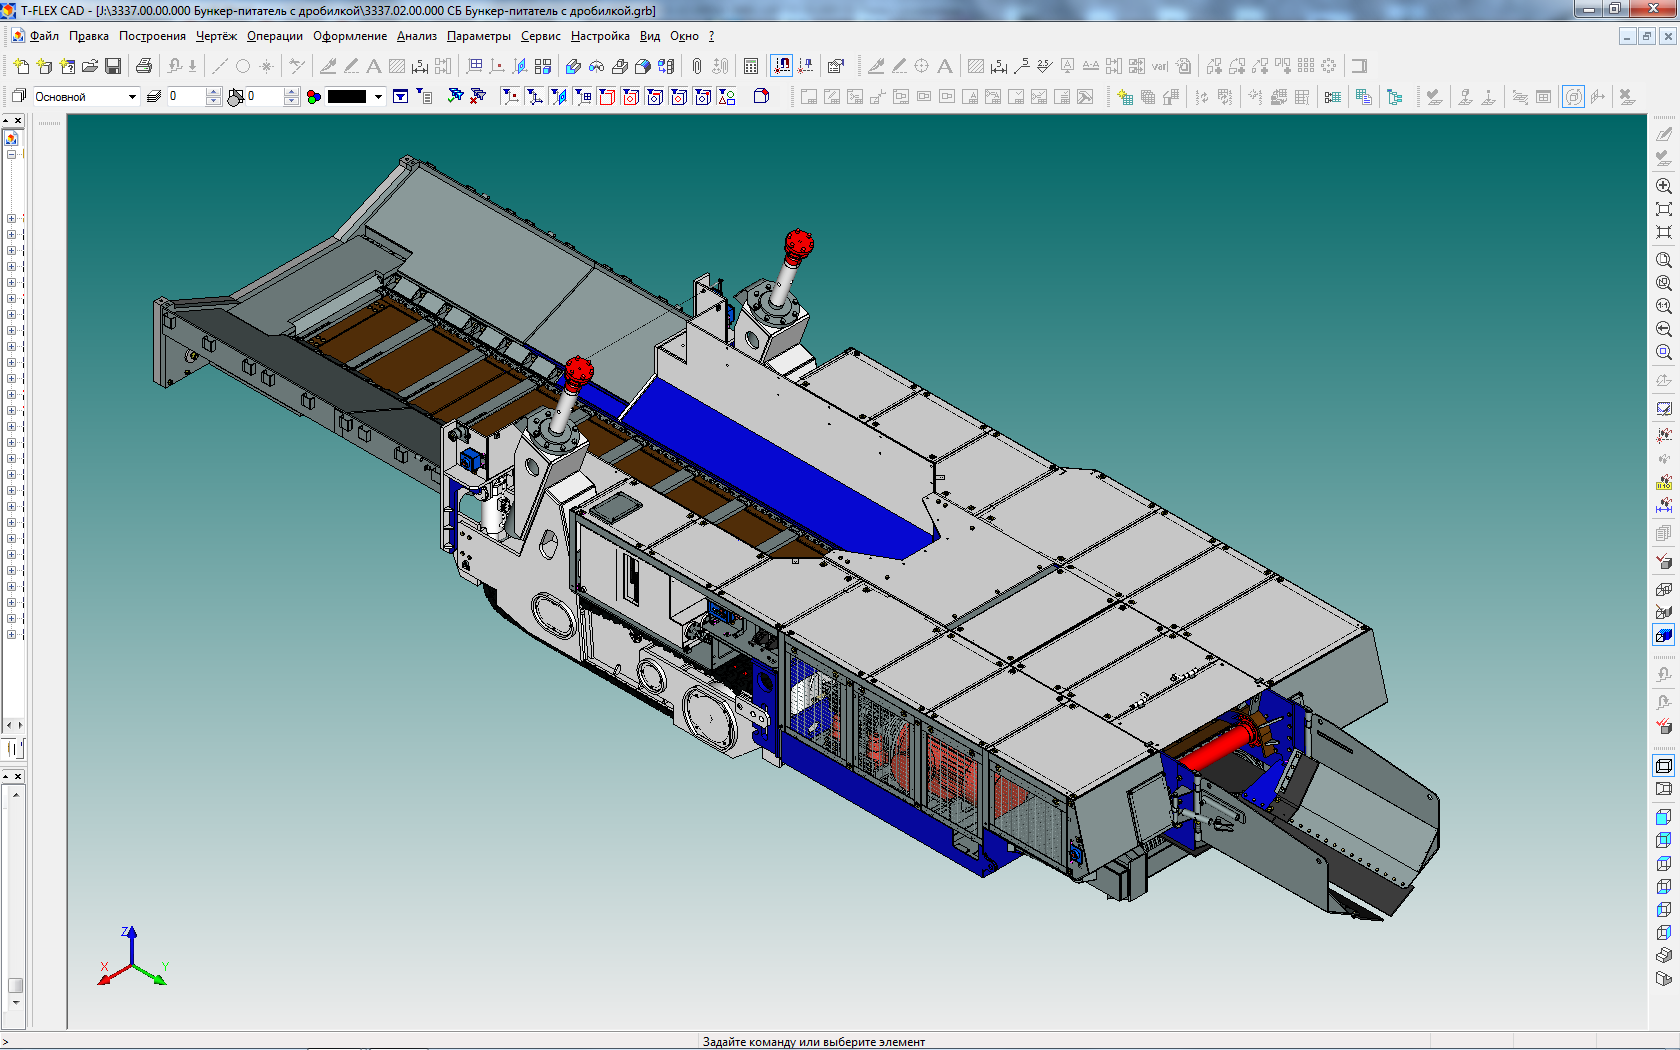 Development of software system for the production of marine equipment